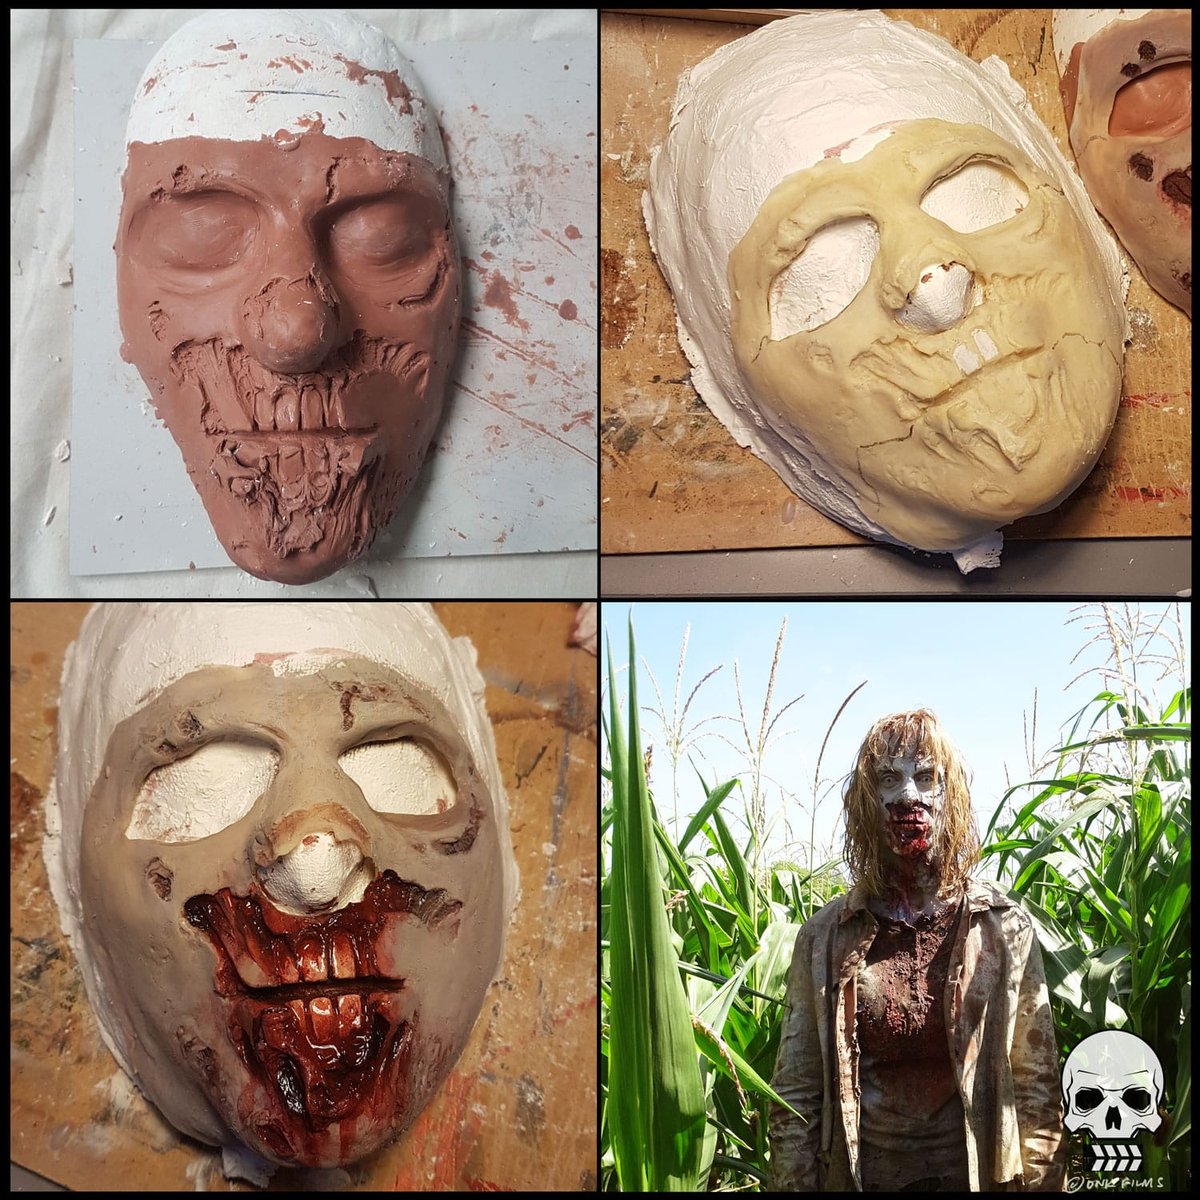 From clay sculpt and latex mould to our zombie! More coming...

#horrorshort #horror #shorts #independentmovie #filmaking #film #movie #latex #latexprosthetic #zombie #zombiemakeup #HorrorCommunity #HorrorArt